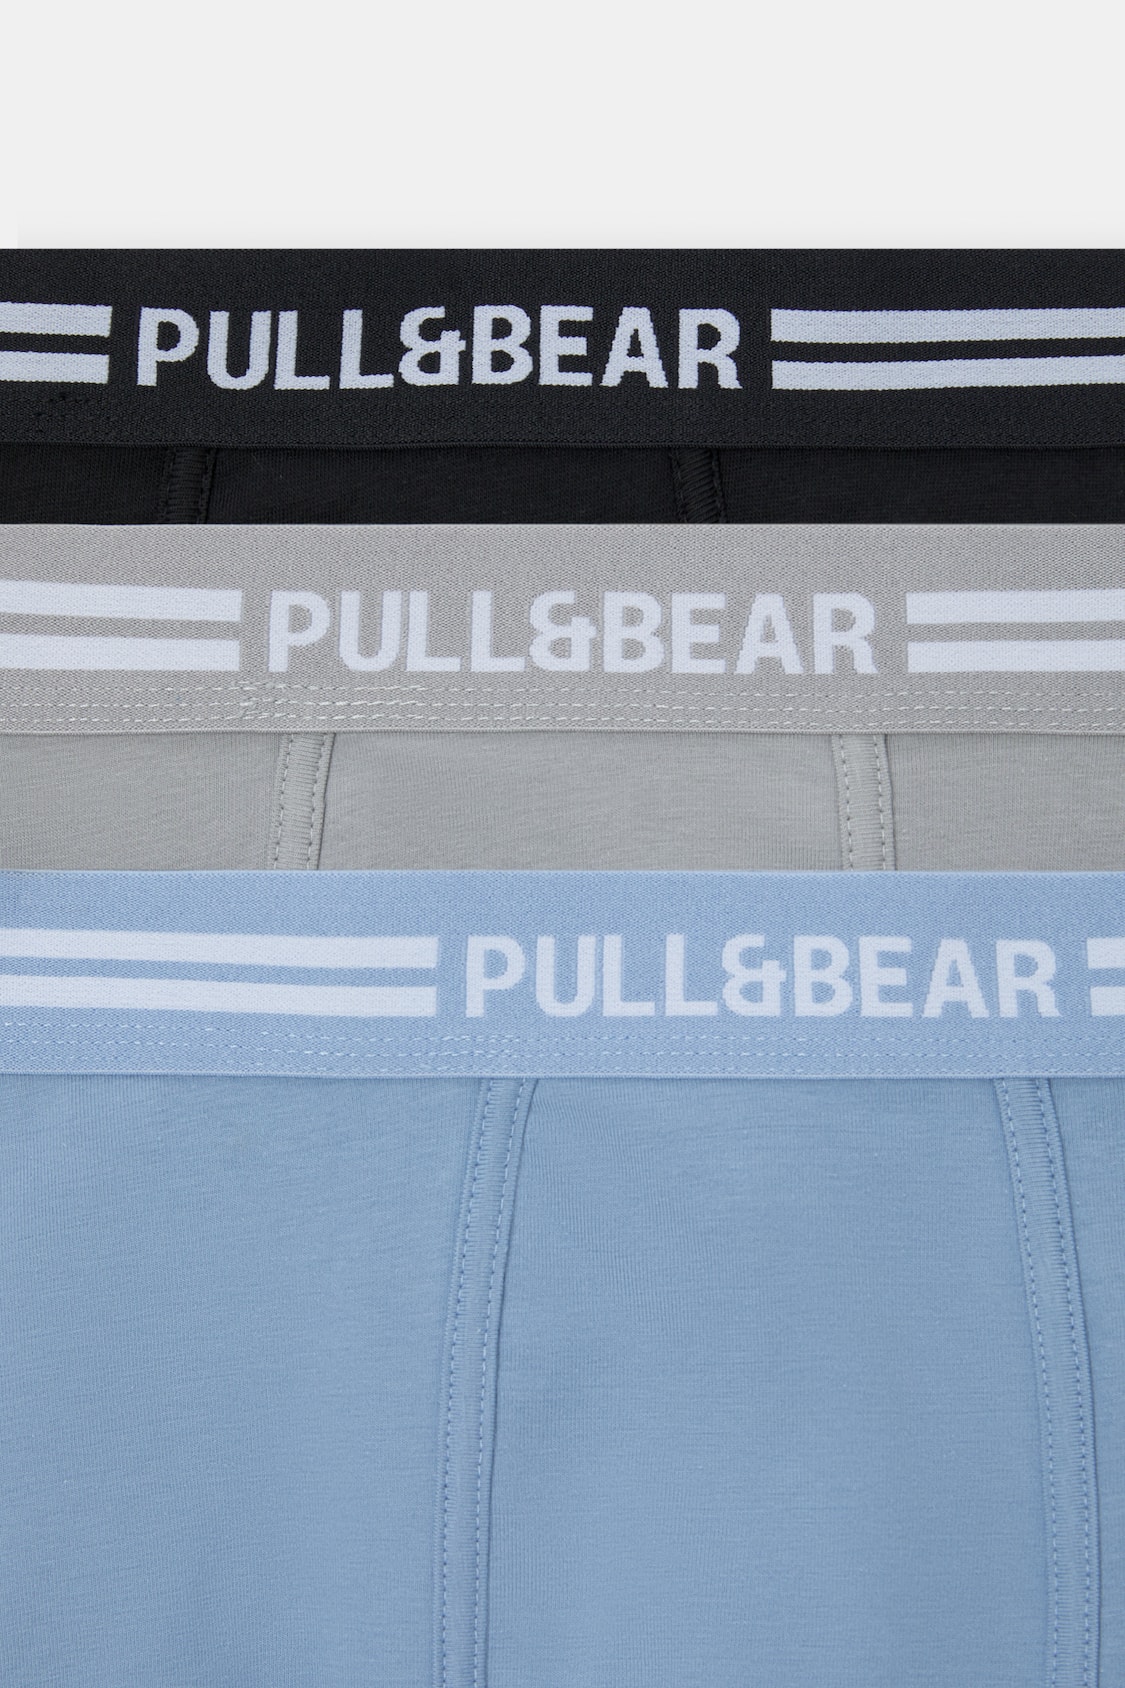 Pack of 3 double striped boxers - PULL&BEAR